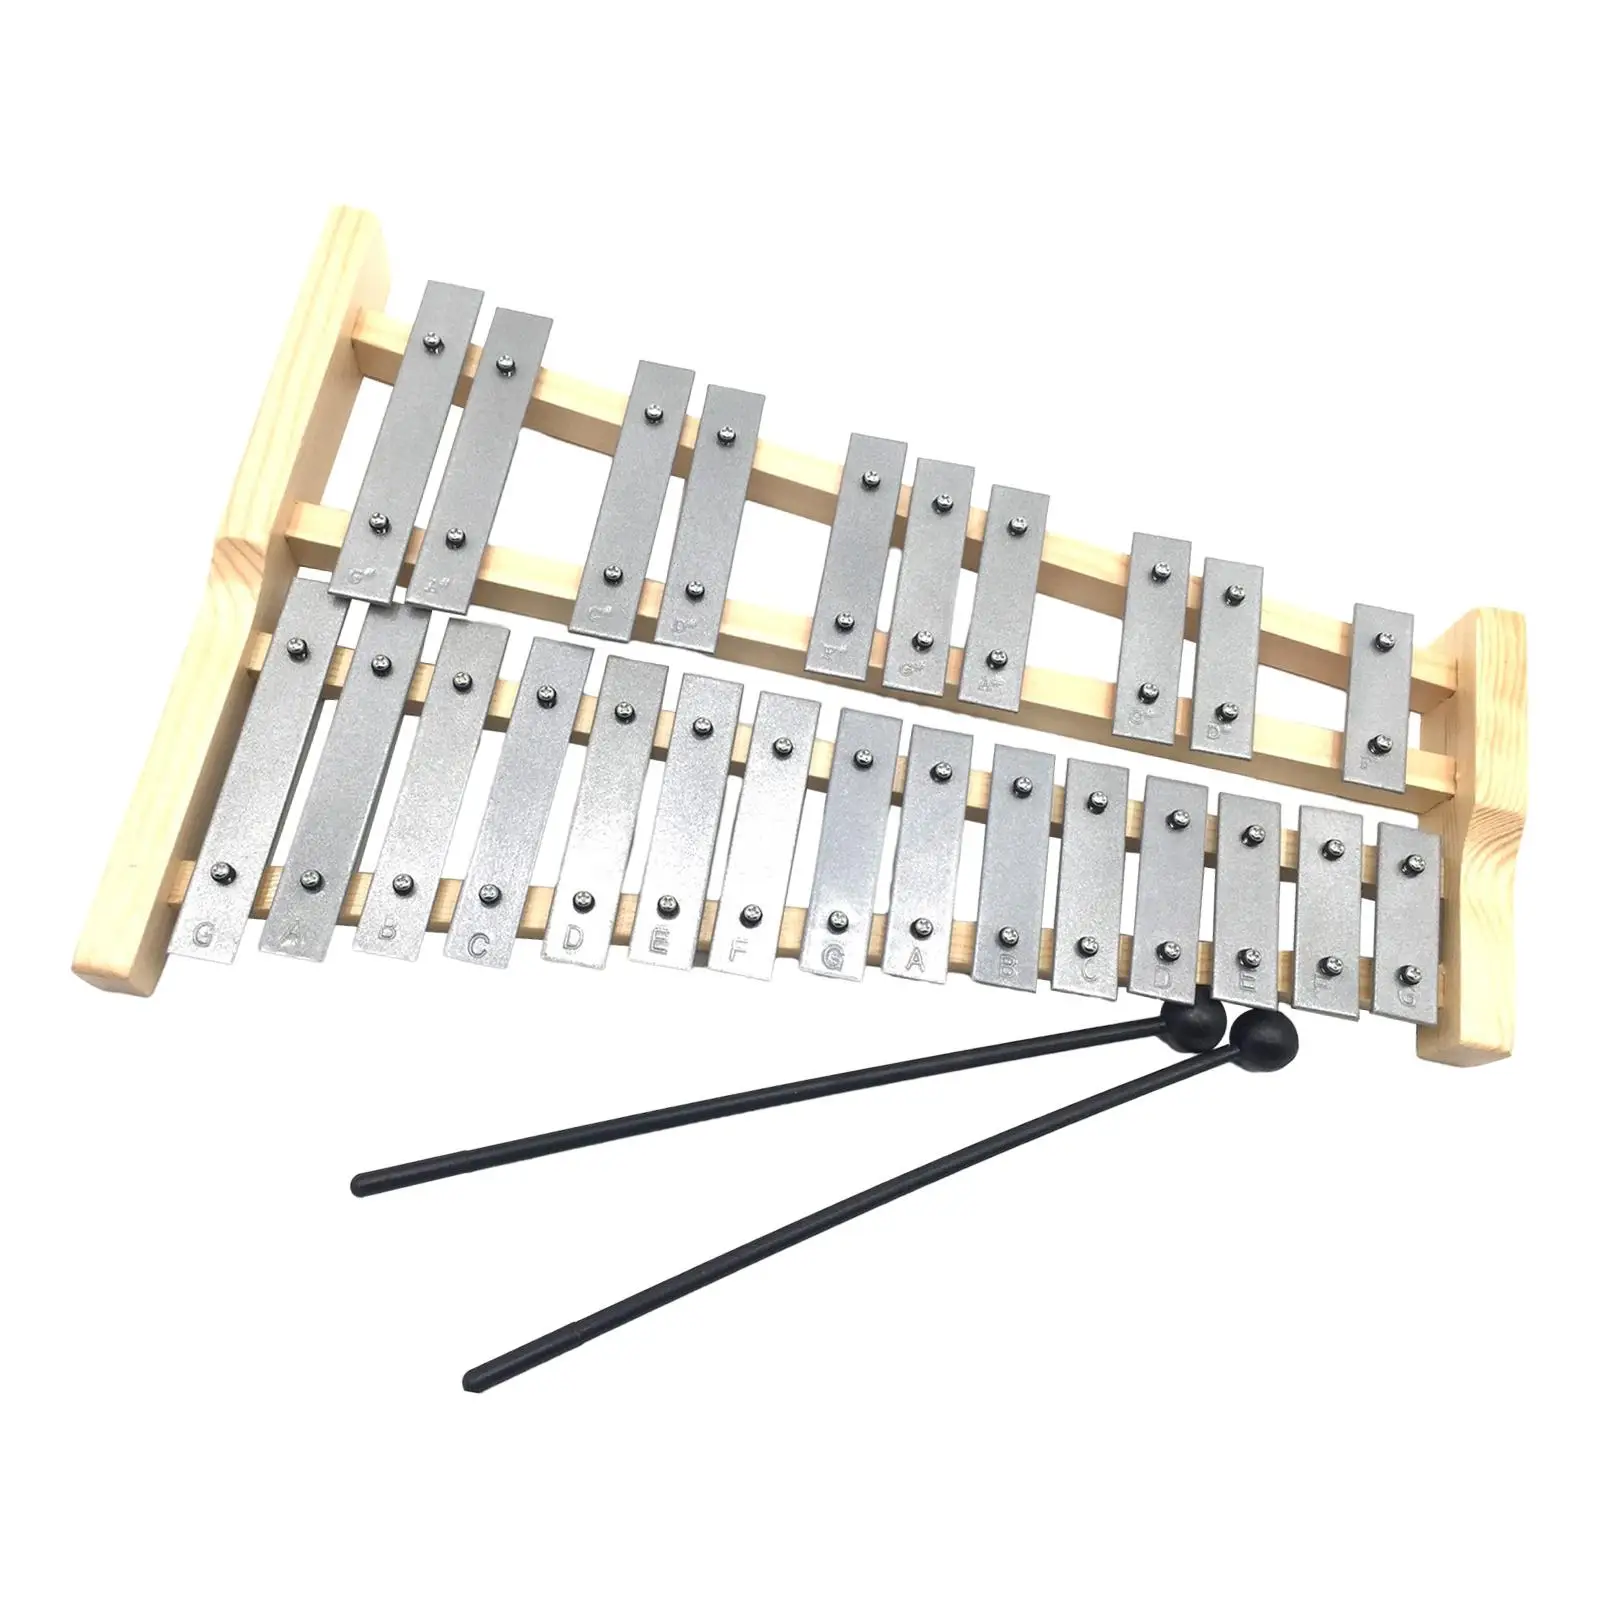 25 Key Glockenspiel Wooden Frame for Kids Adults Portable Xylophone Percussion Instrument Musical Educational Tuned Glockenspiel